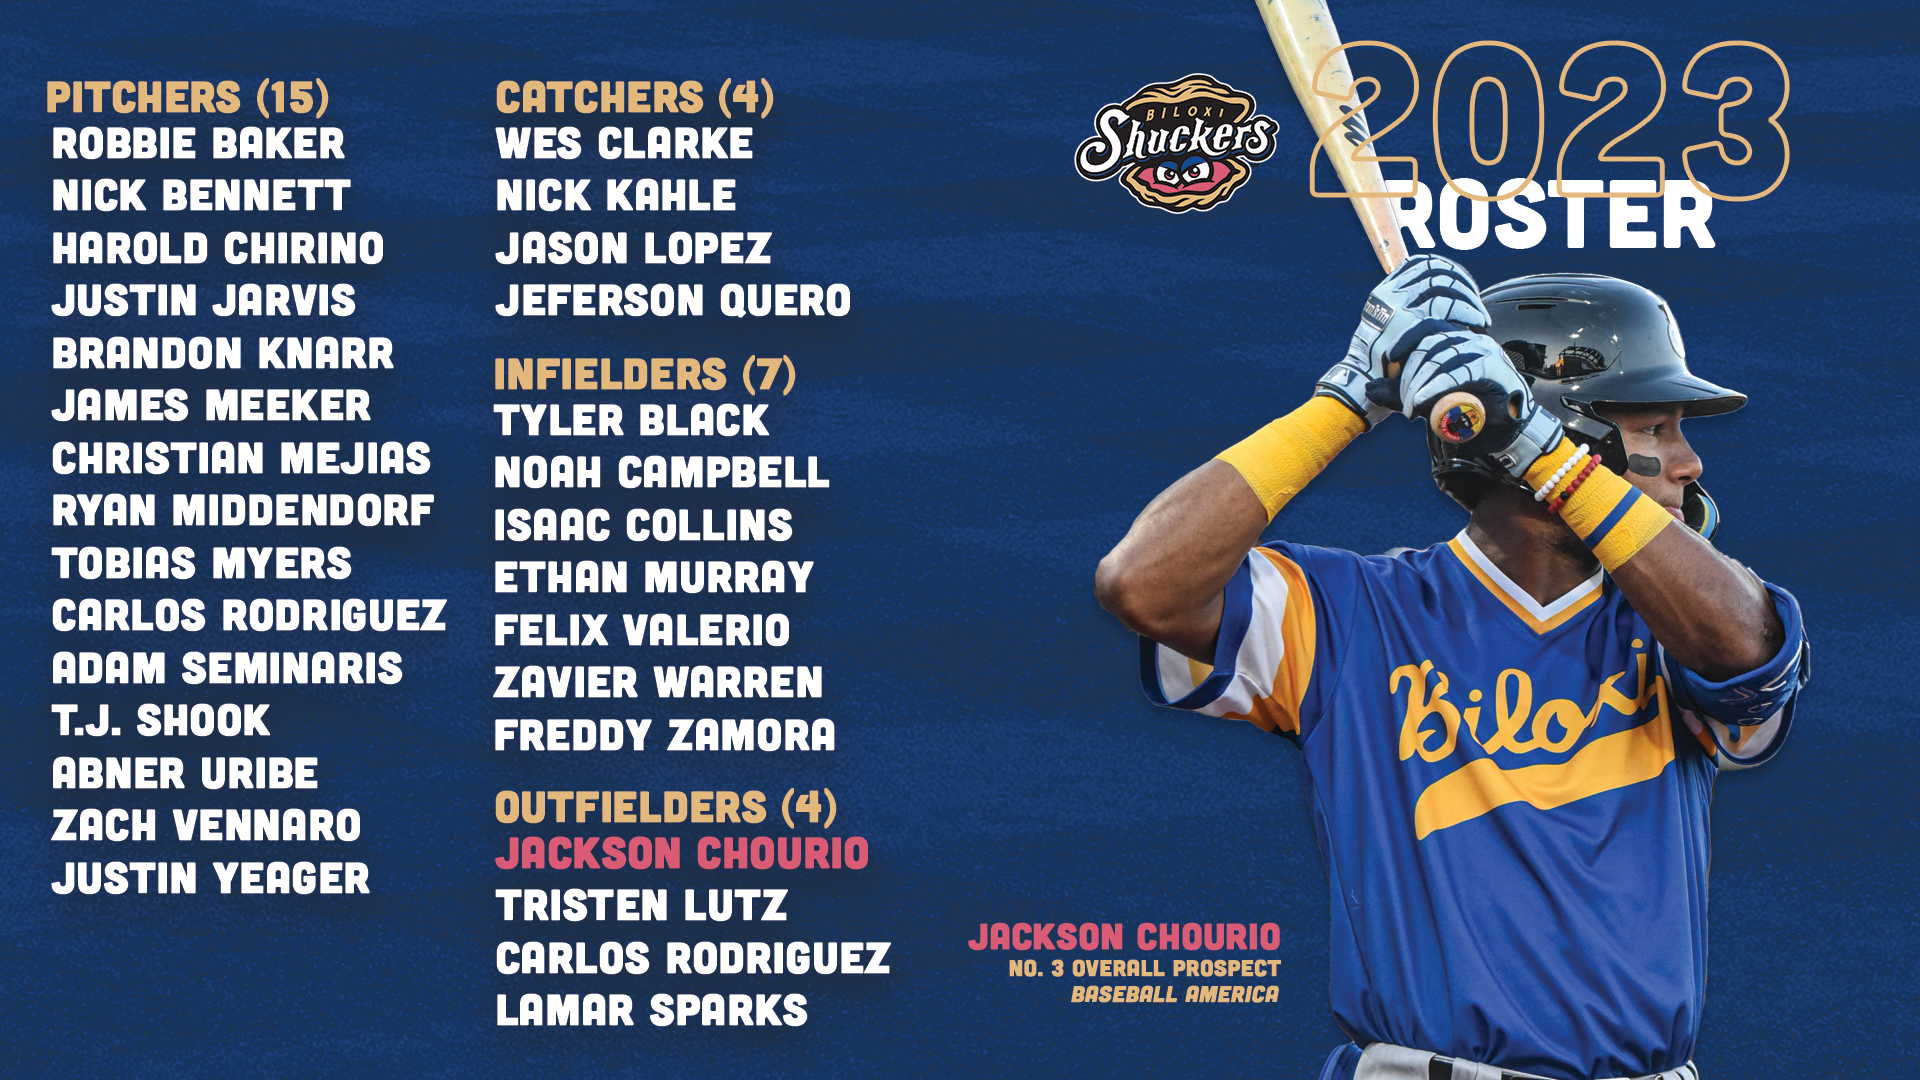 Biloxi Shuckers announce opening day roster; Baseball America's #3